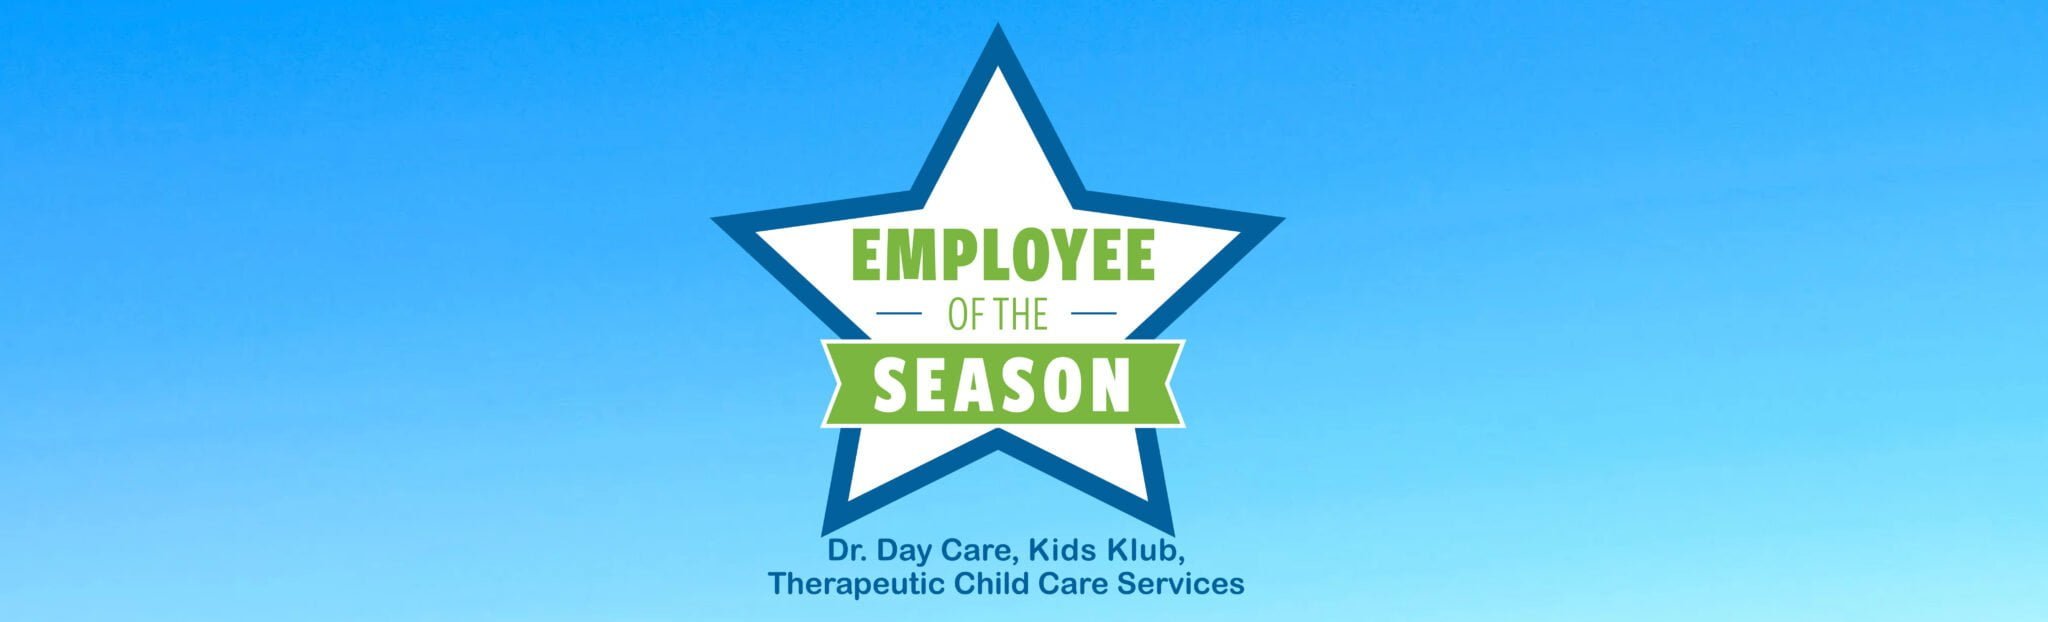 Congratulations to our Spring 2021 Employee of the Season!